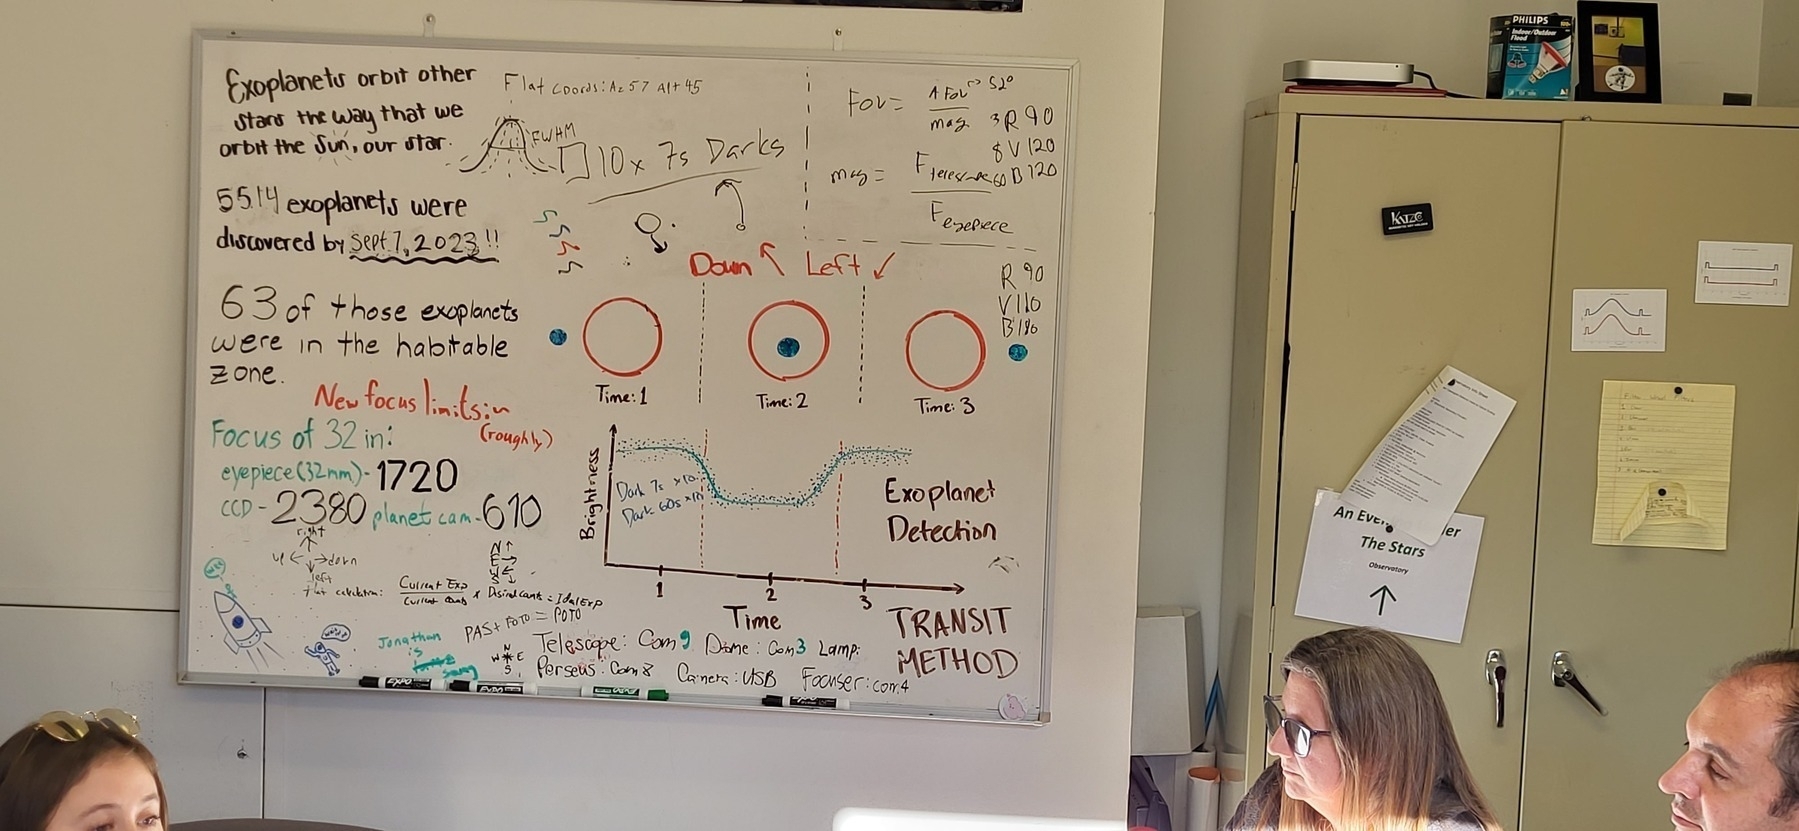 whiteboard in the George Mason University Observatory control center 